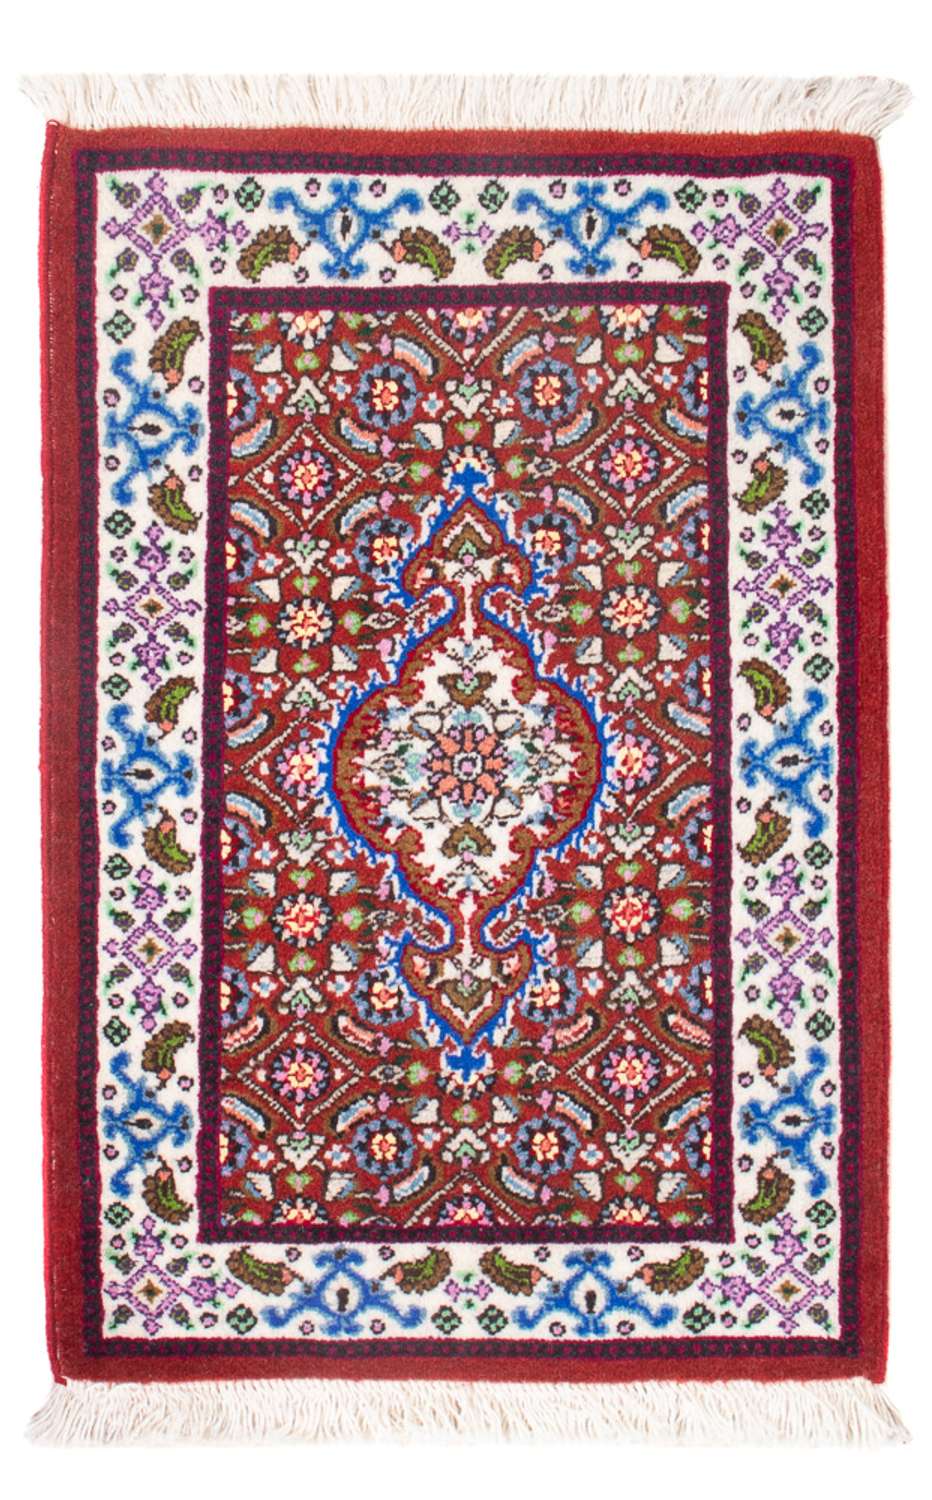 Perser Rug - Classic - Royal - 60 x 40 cm - red